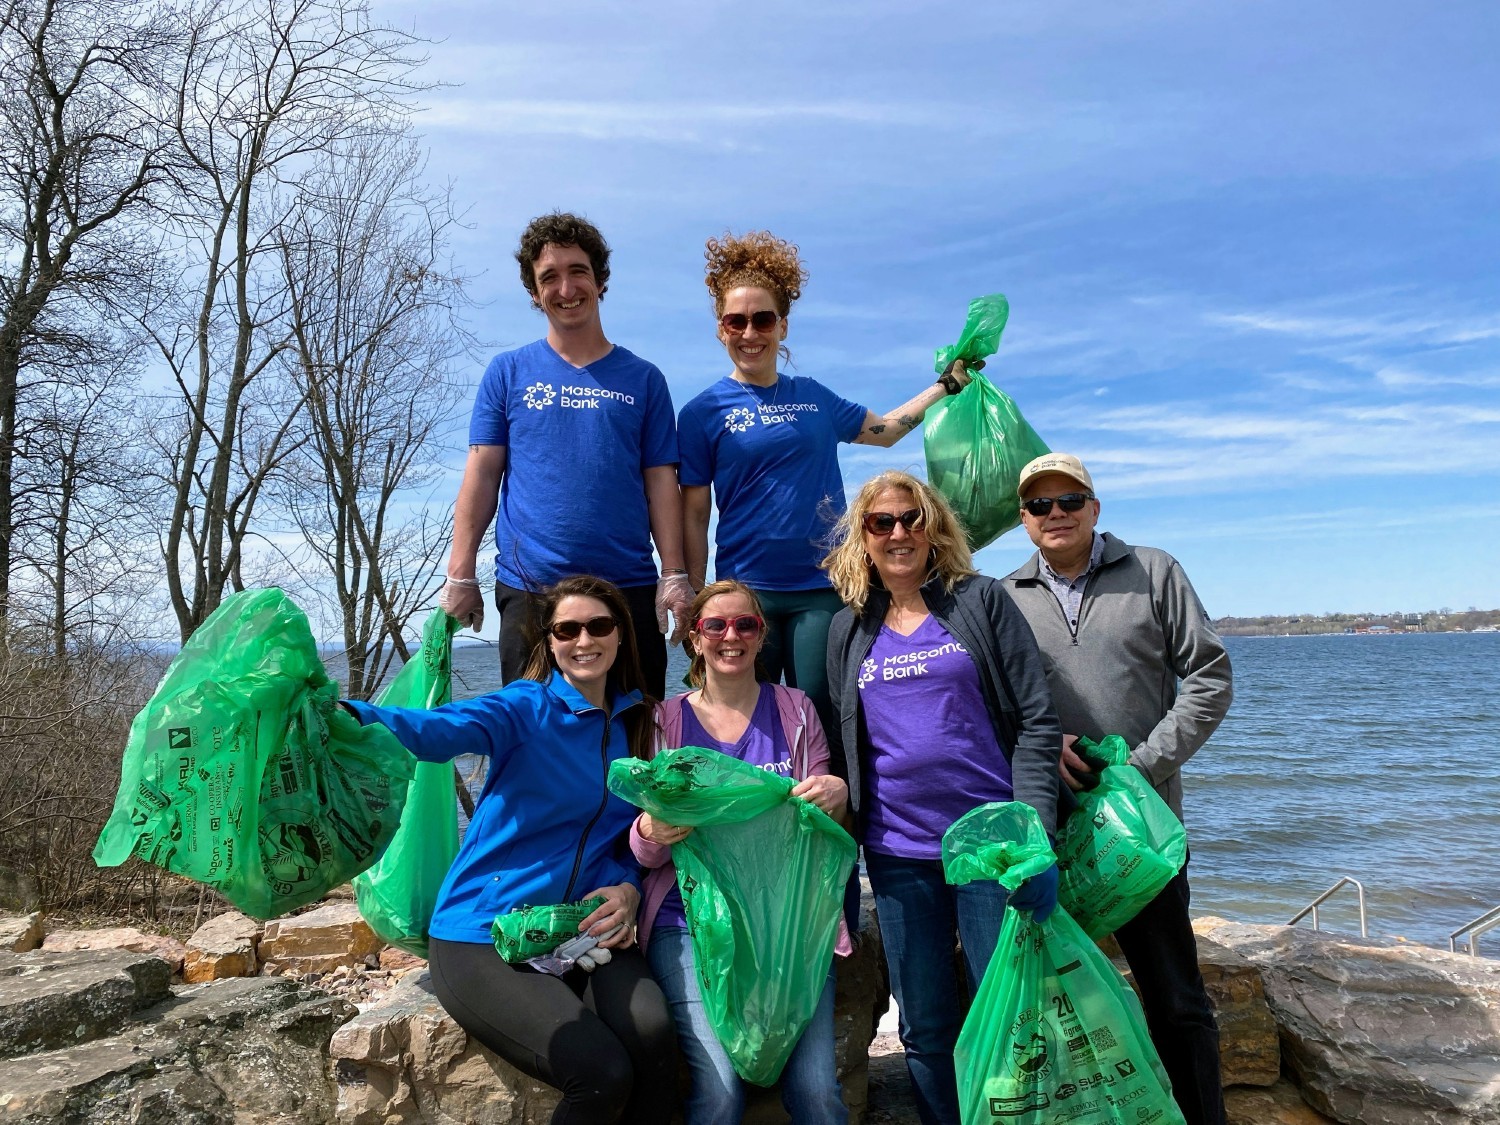 Mascoma Bank employees using their paid volunteer time to clean up their community during Green Up May.